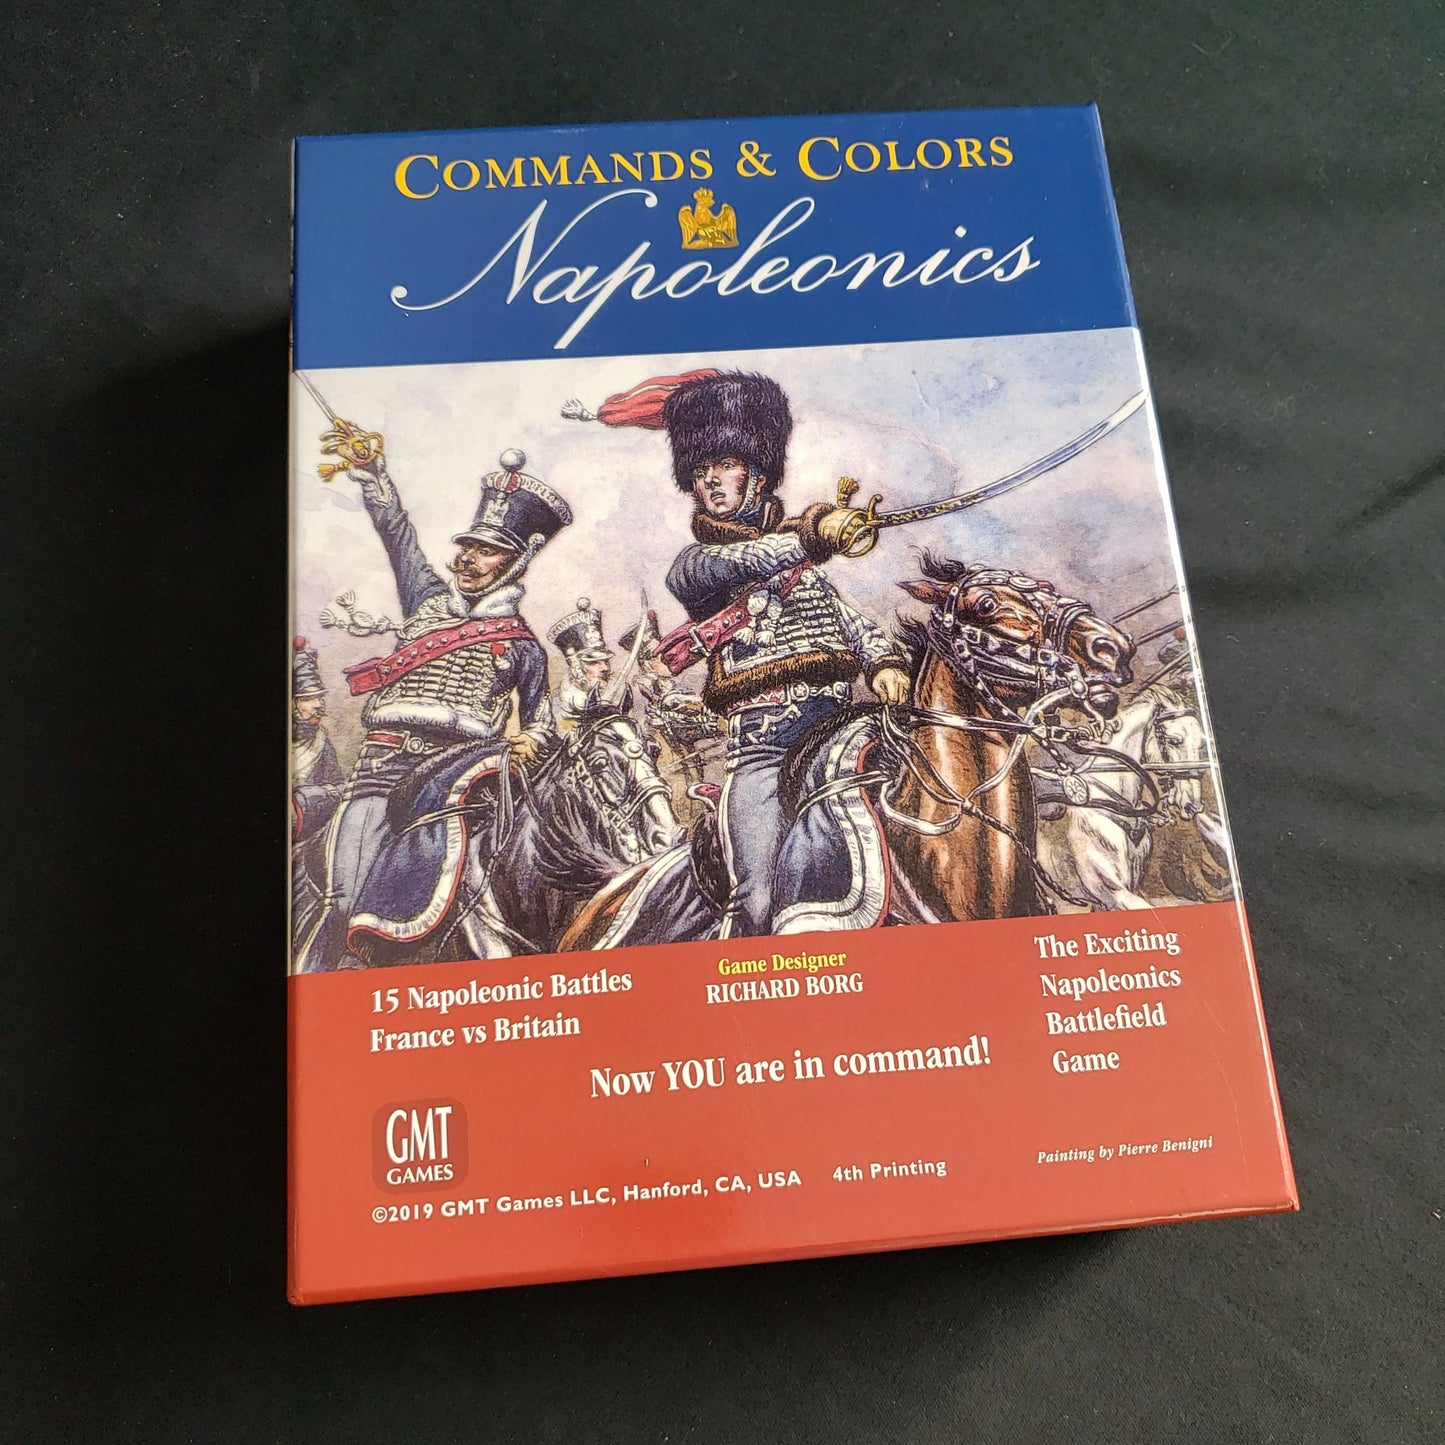 Image shows the front cover of the box of the Commands & Colors: Napoleonics board game